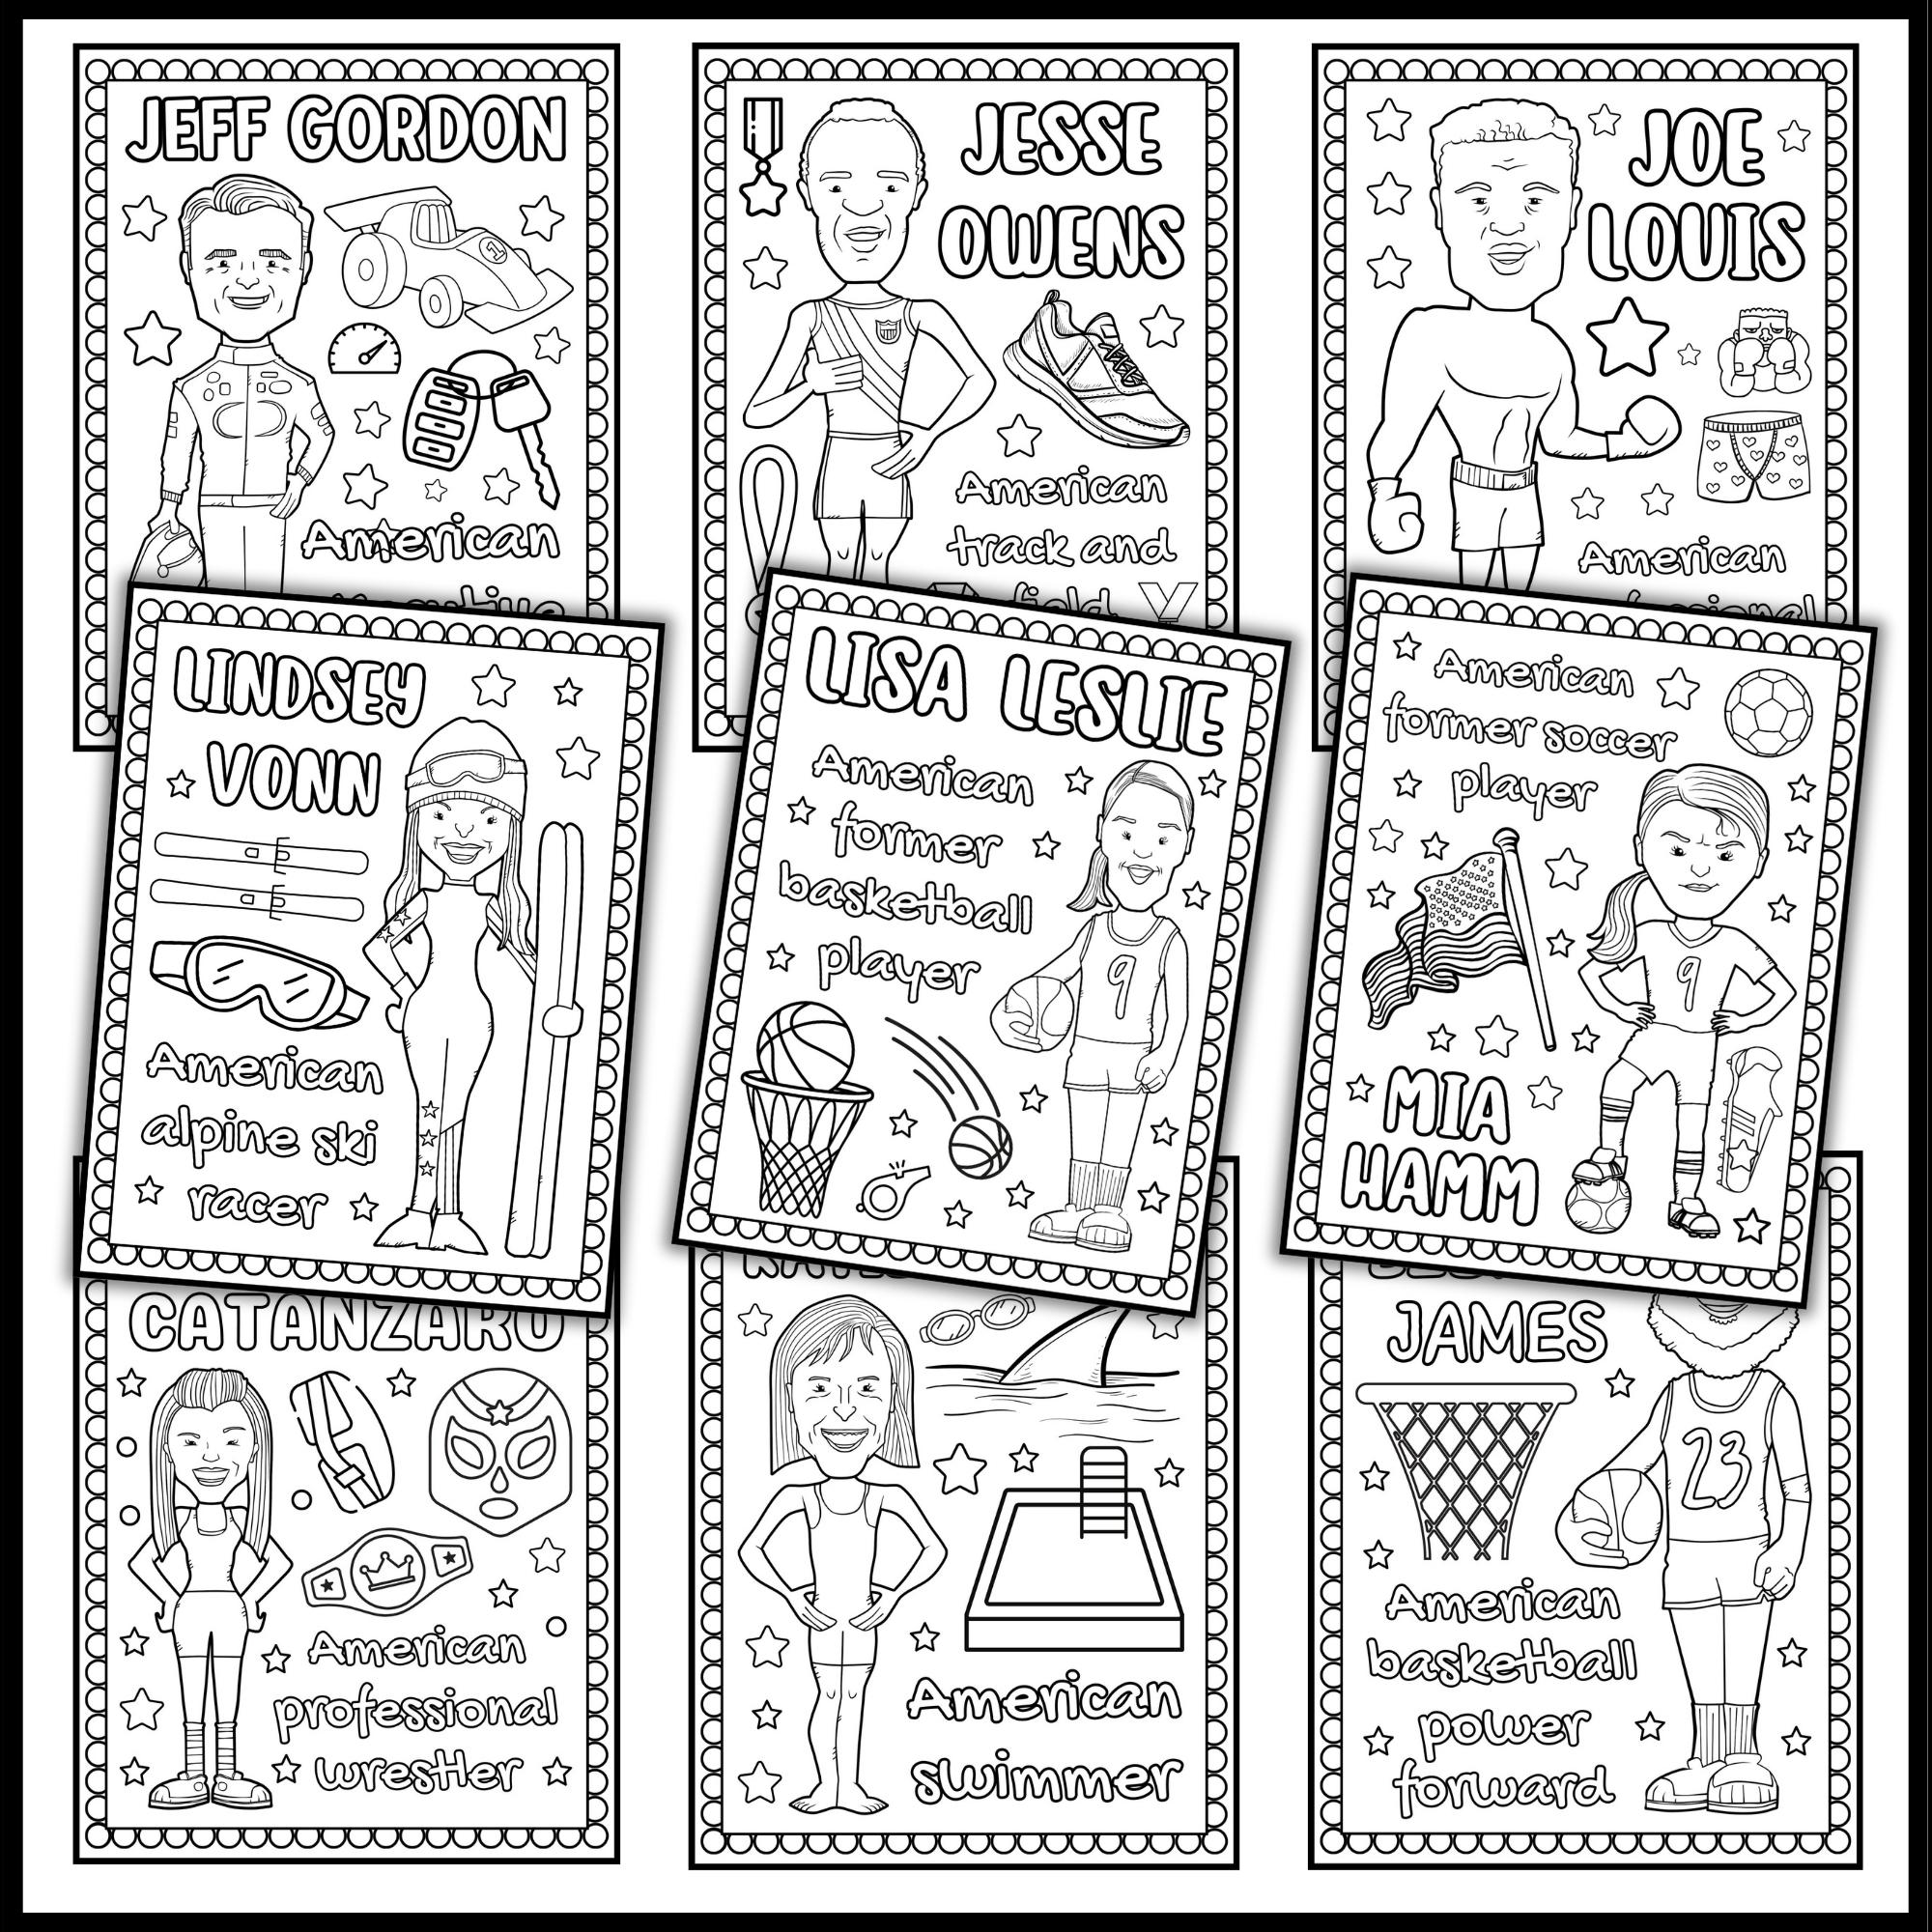 Famous sports figures coloring pages